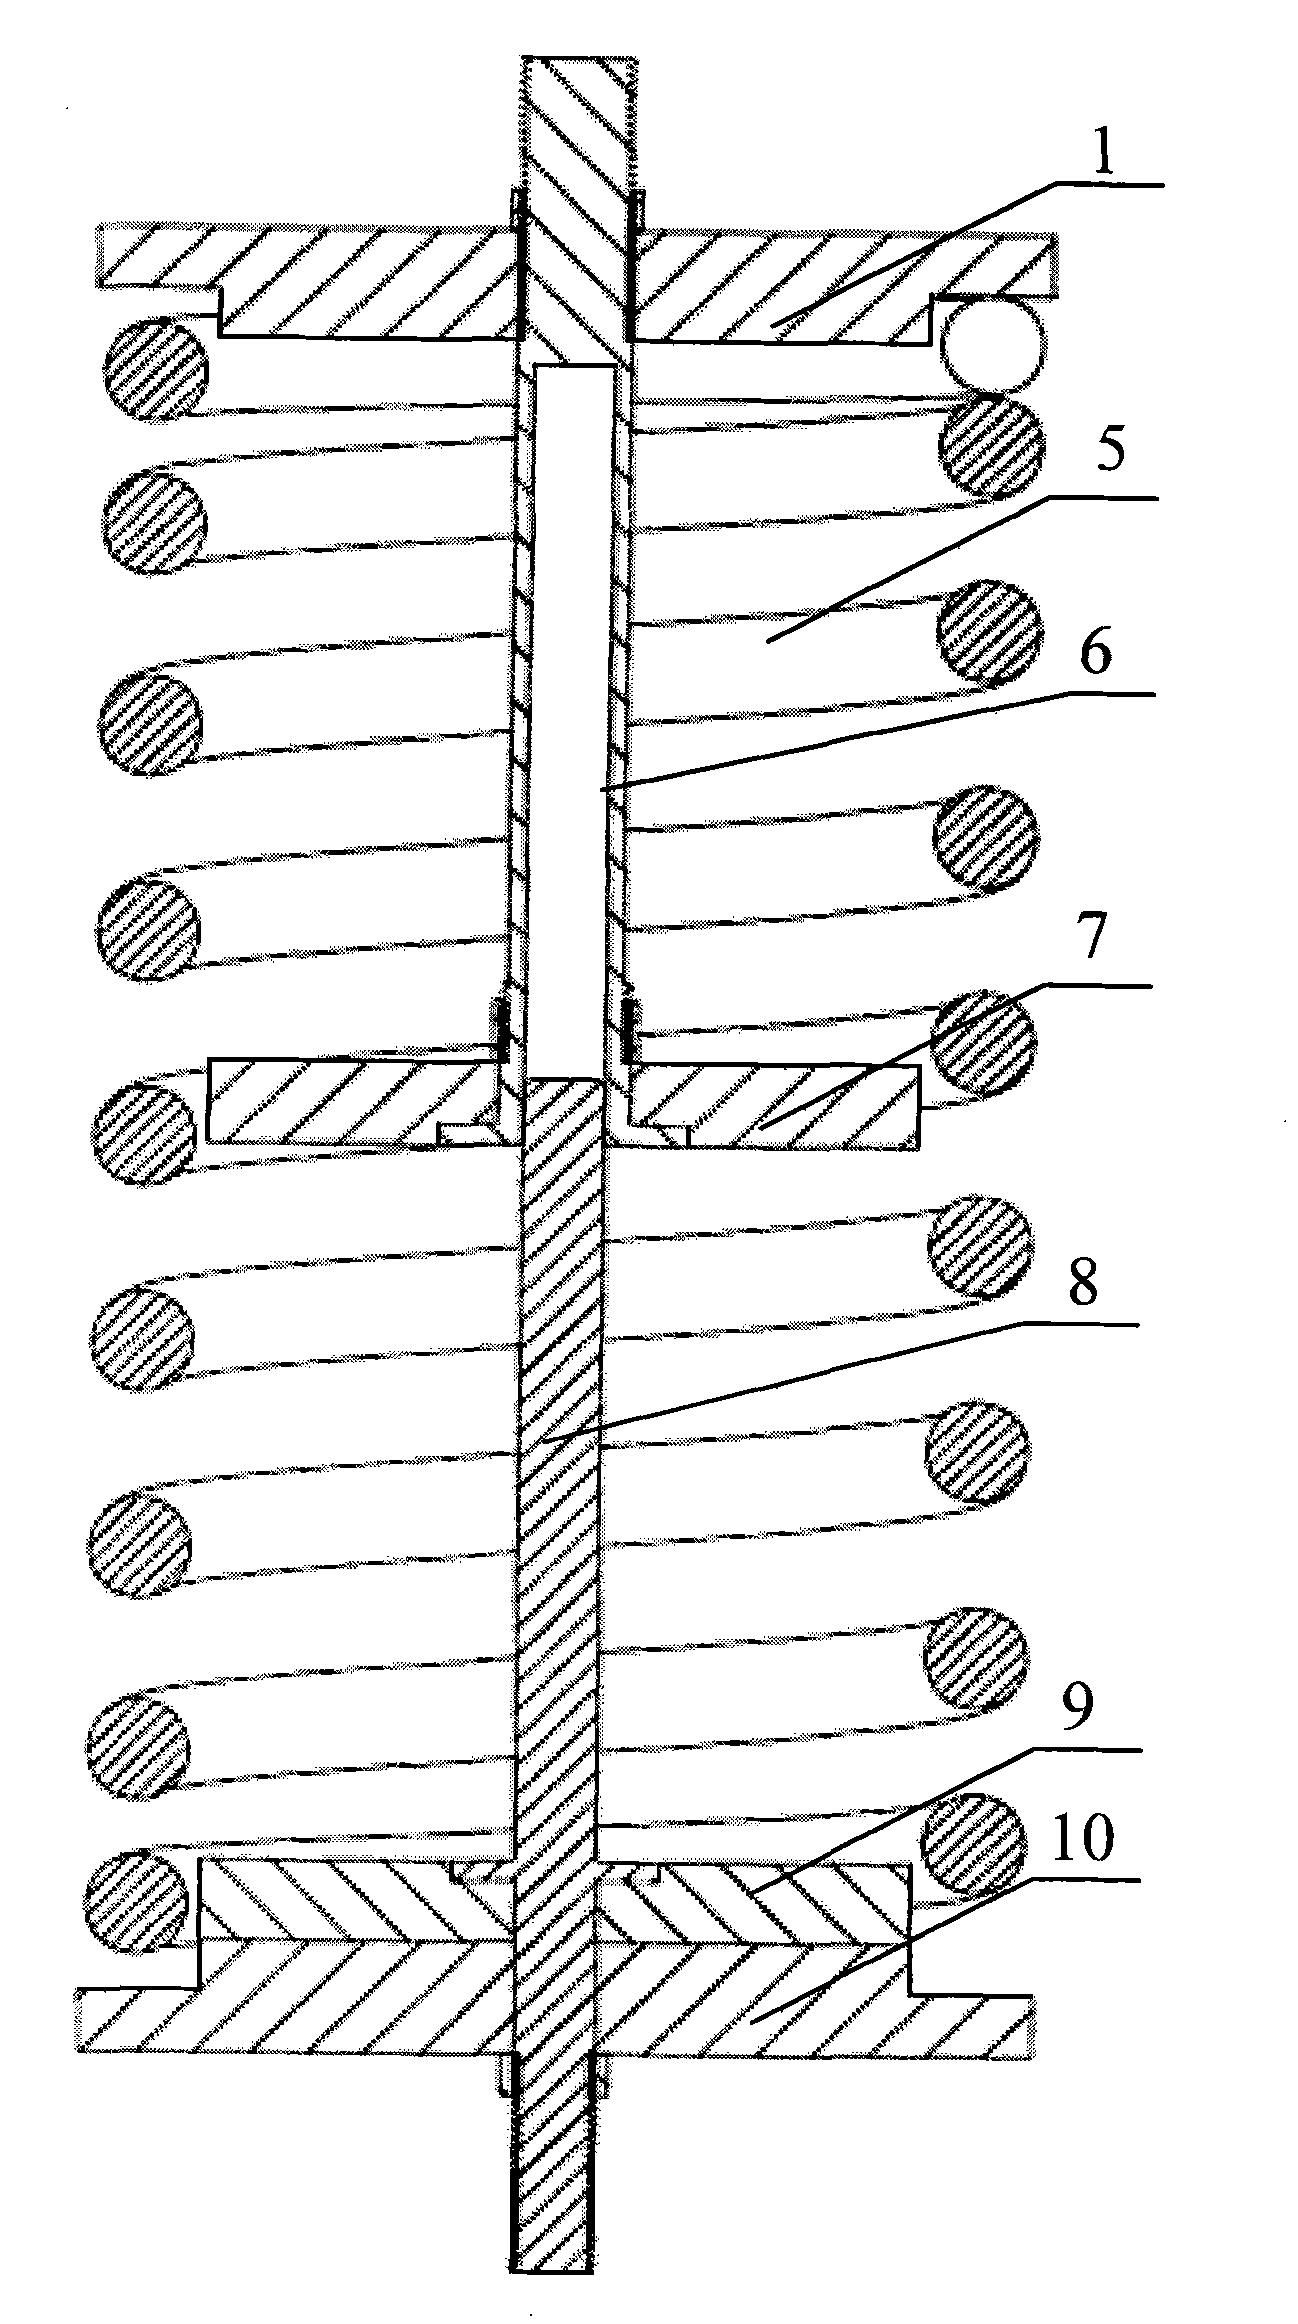 Magnetic rigidity-controlled suspension spring mechanism